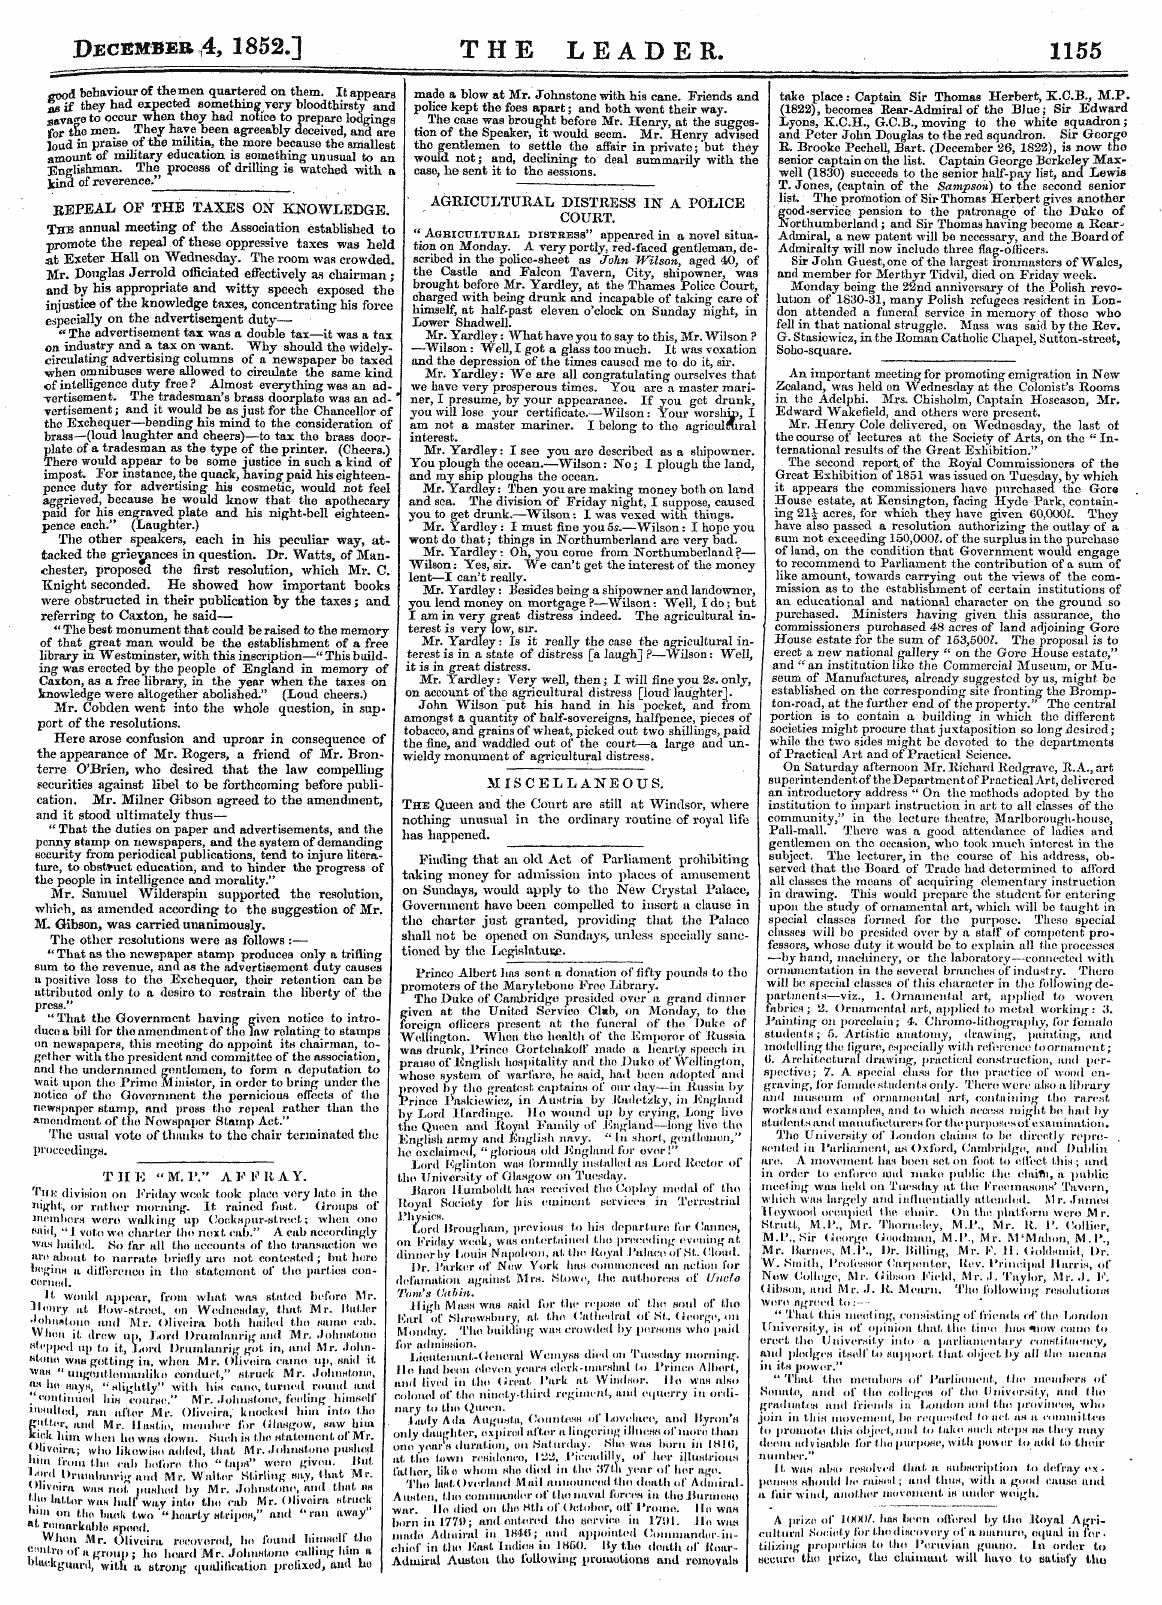 Leader (1850-1860): jS F Y, Country edition - December 4, 1852.] The Leader. 1155